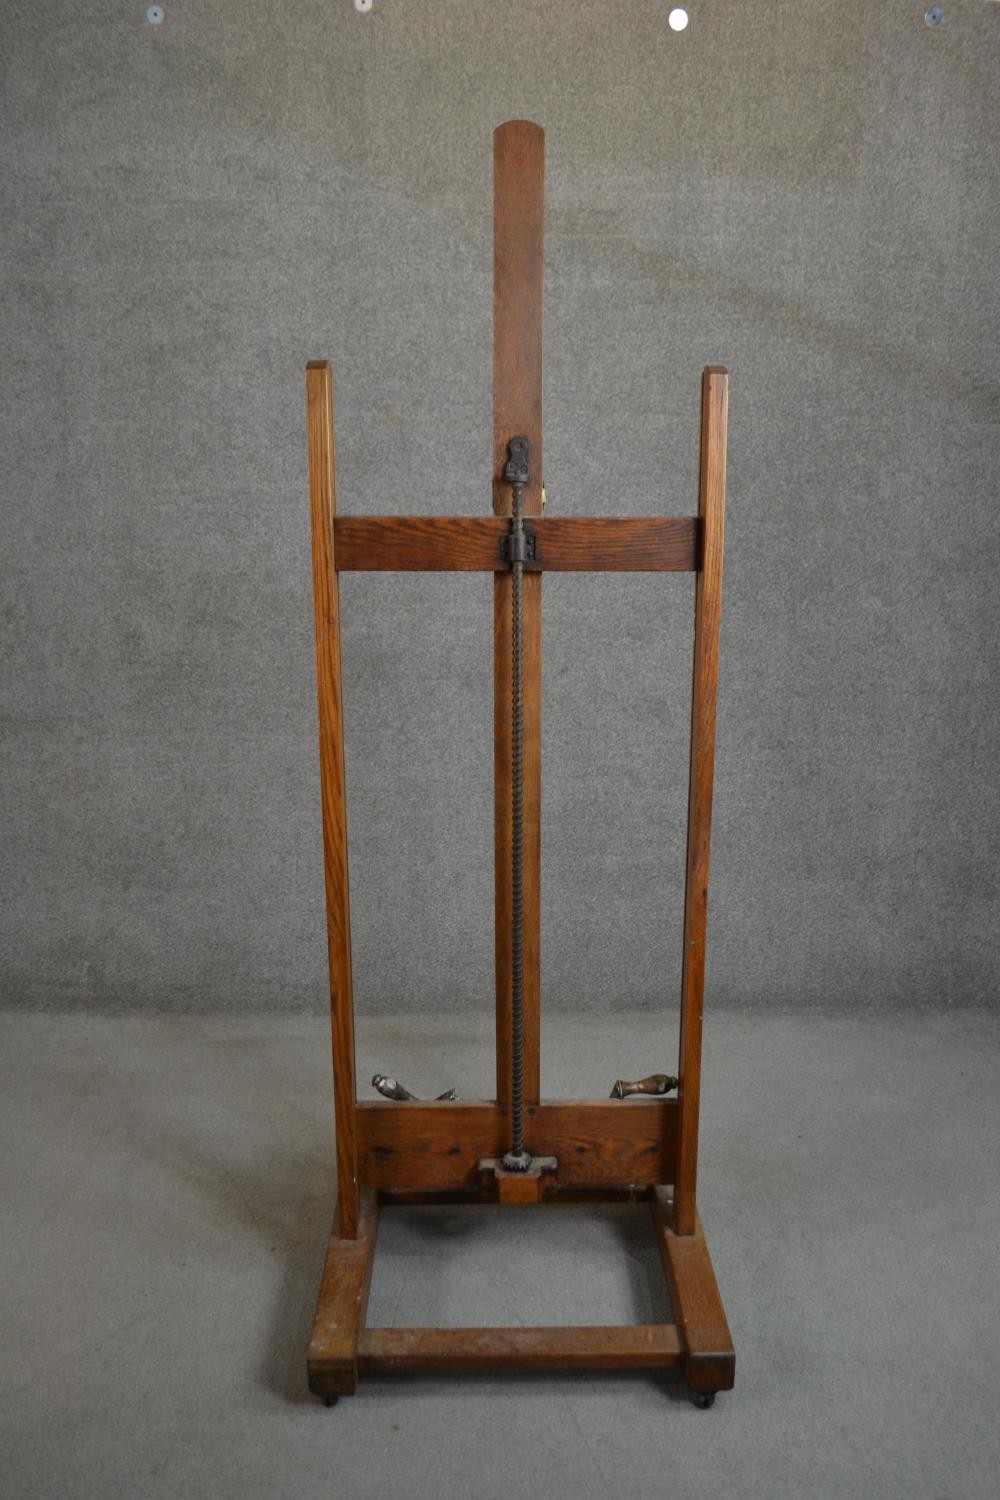 A late 19th/early 20th century oak artist's studio easel, with winders for raising and lowering - Image 7 of 7